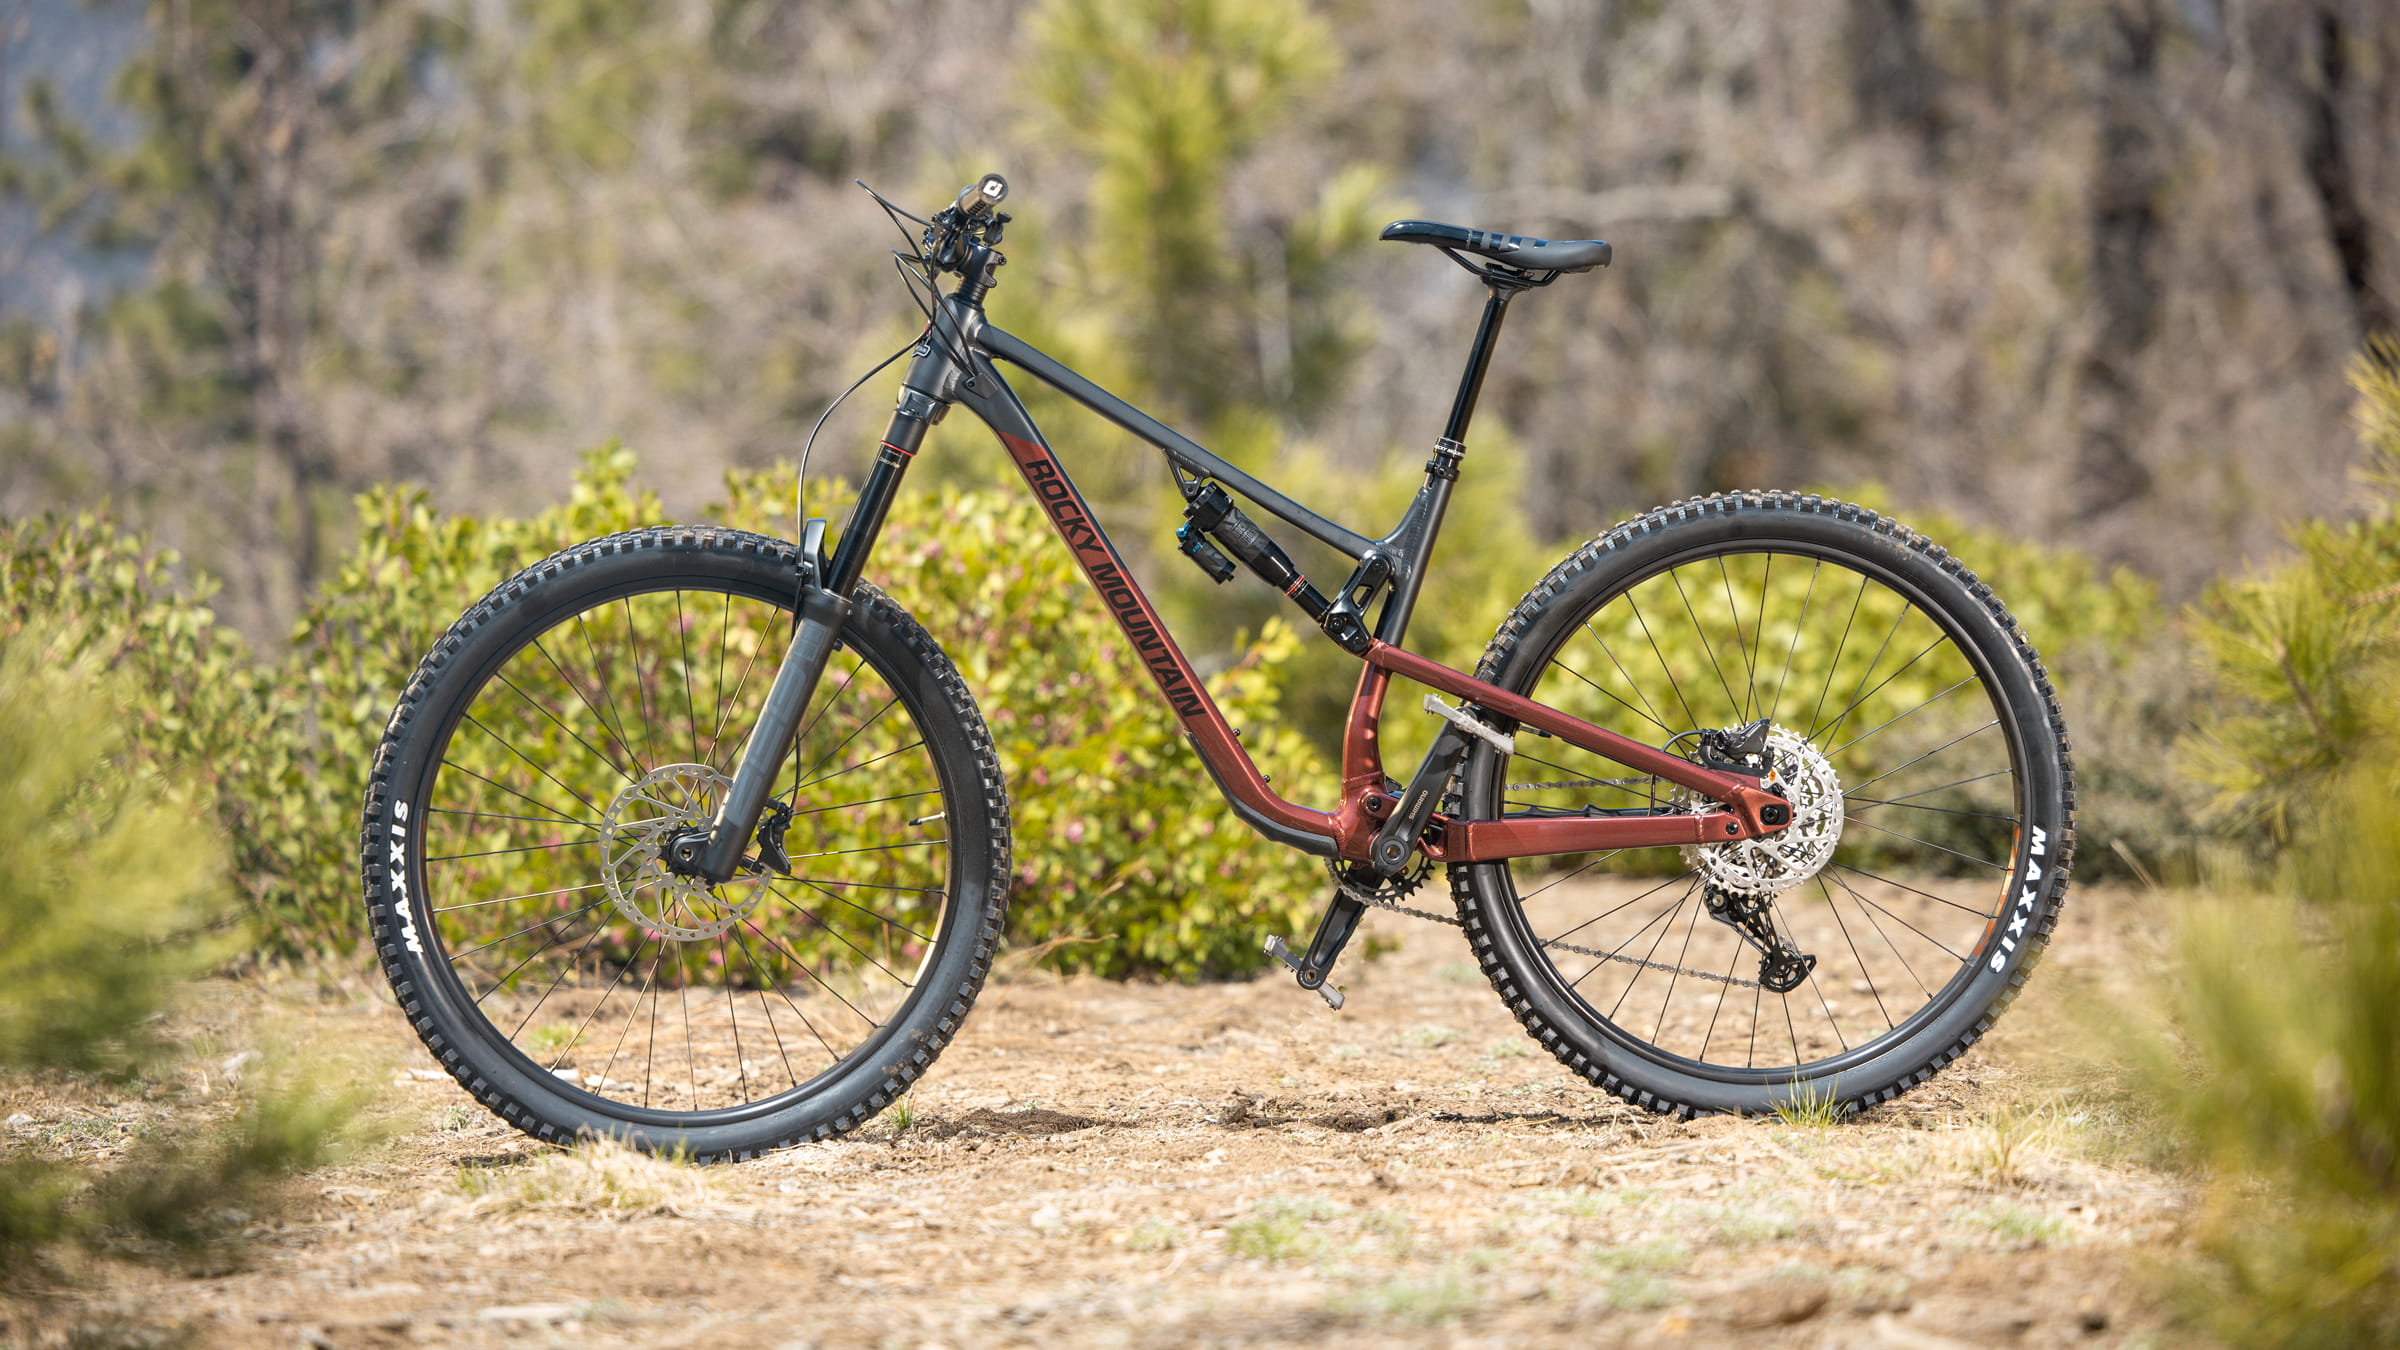 Reserve Mountain Bike Rentals for Snow Valley and Snow Summit